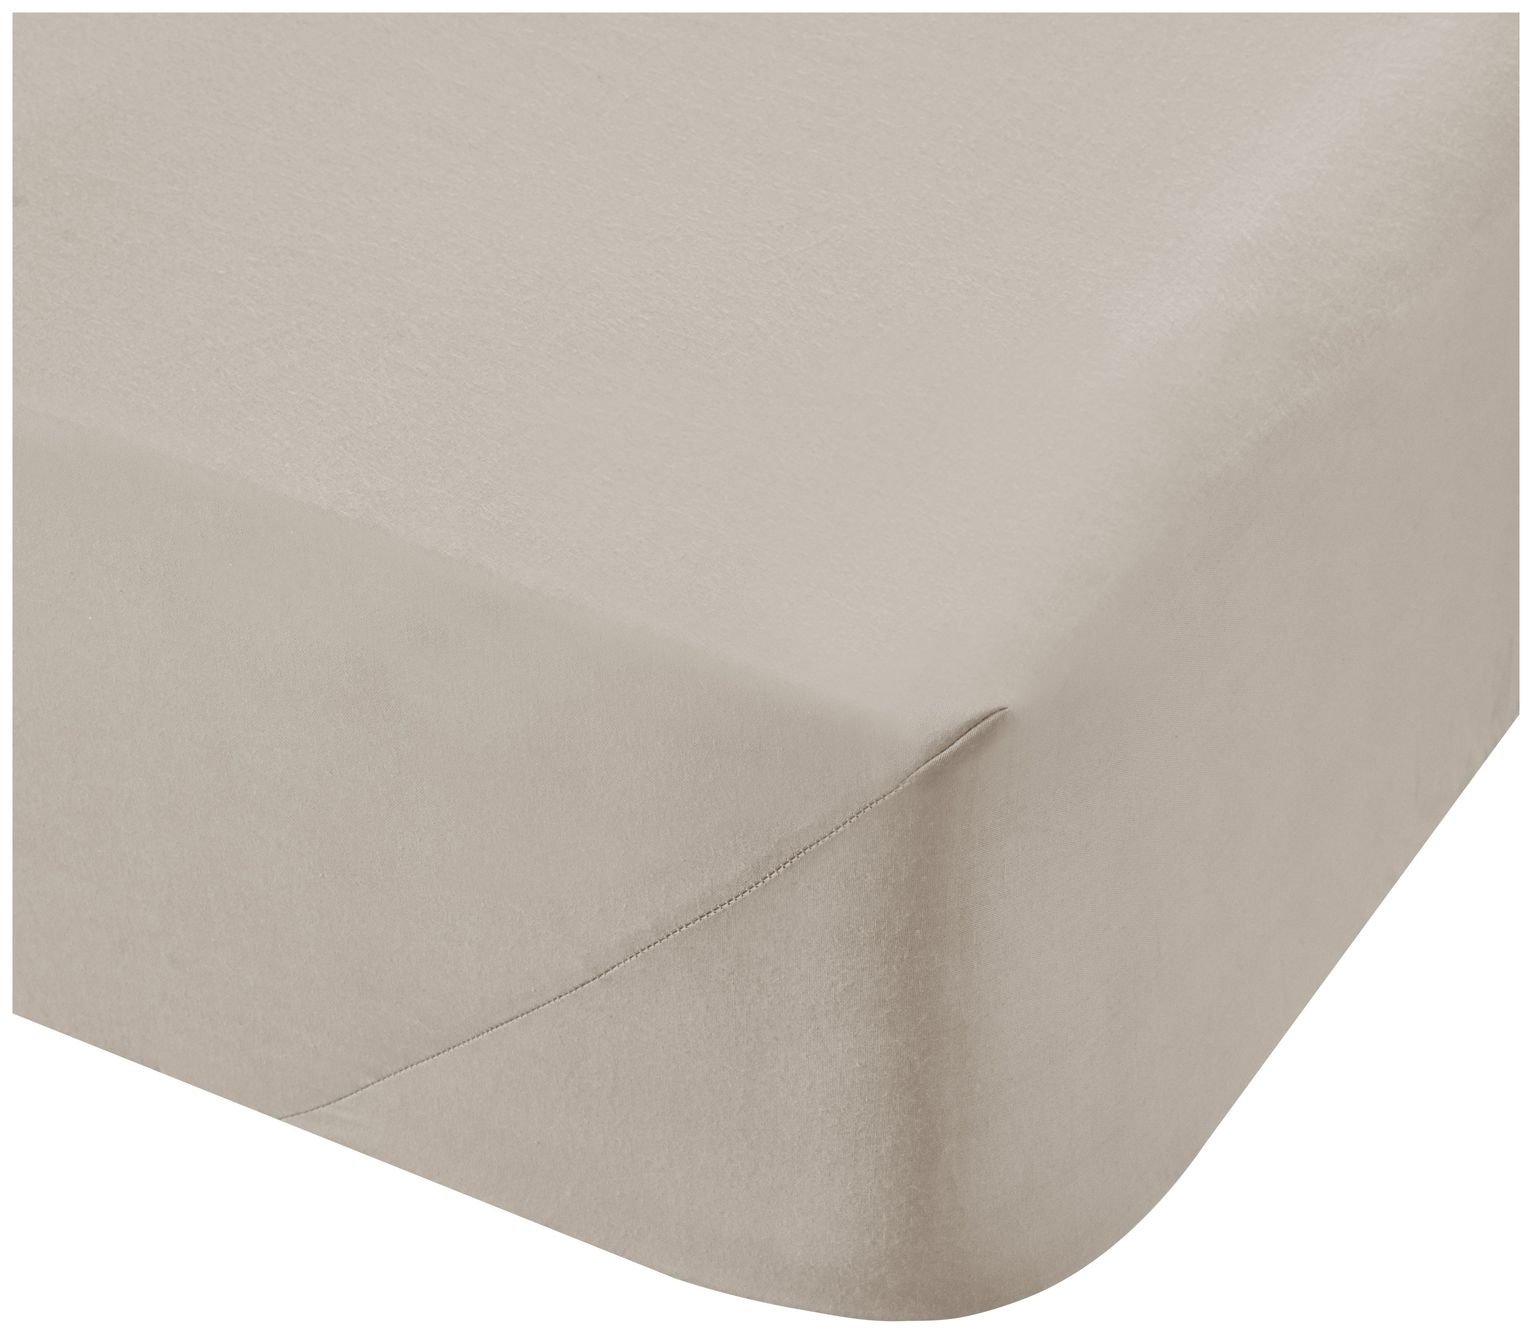 Catherine Lansfield Natural Easy Care Fitted Sheet ‚Äì Double review